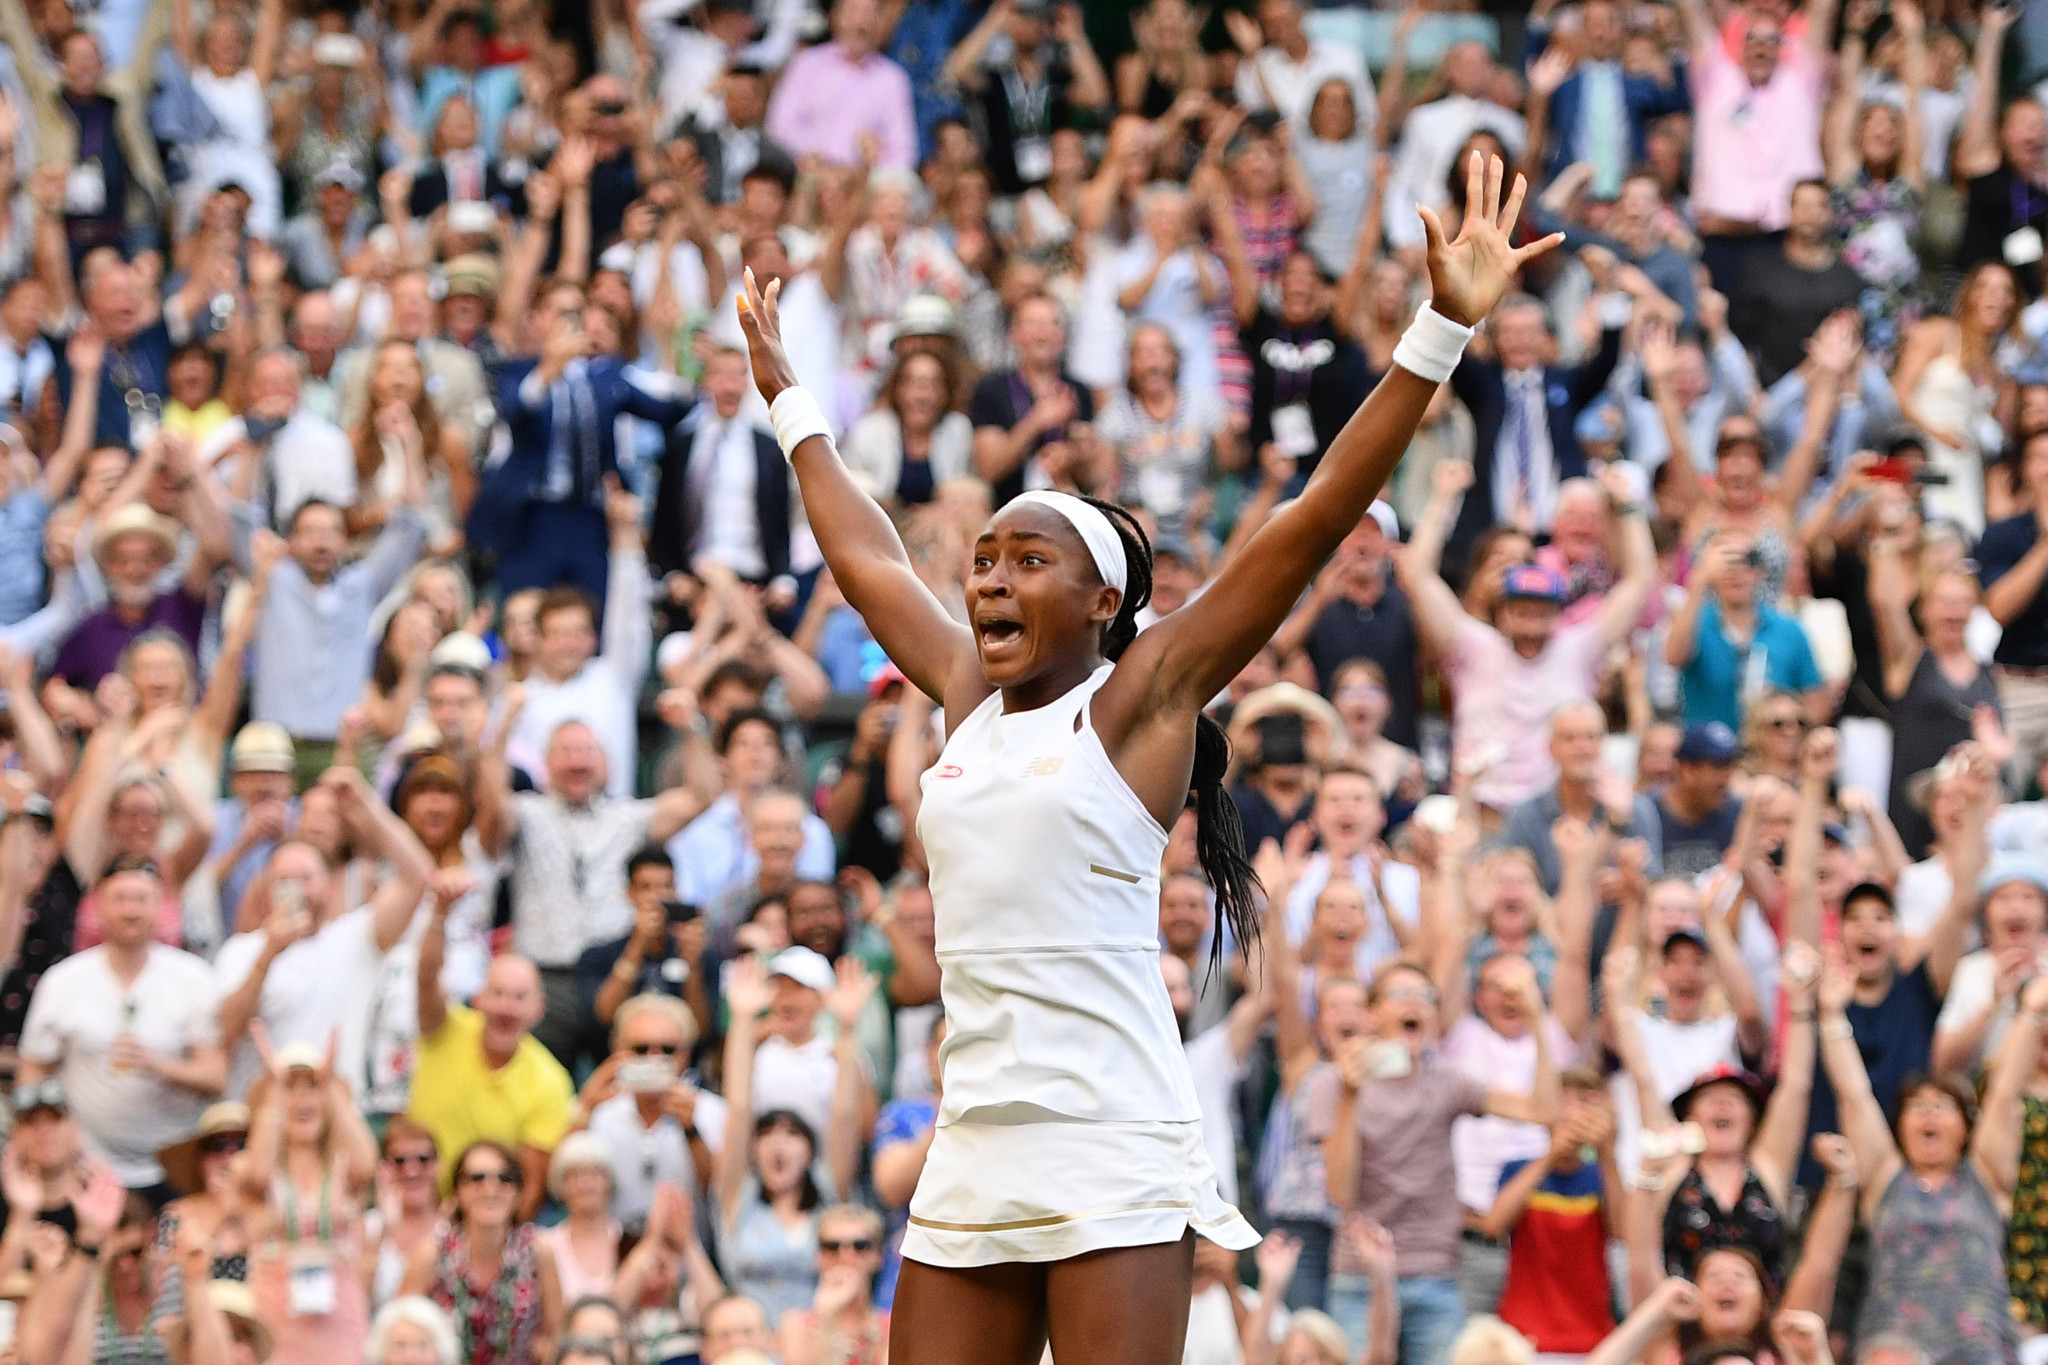 American teenager Coco Gauff saved two match points en route to extending her fairytale run at Wimbledon ©Getty Images